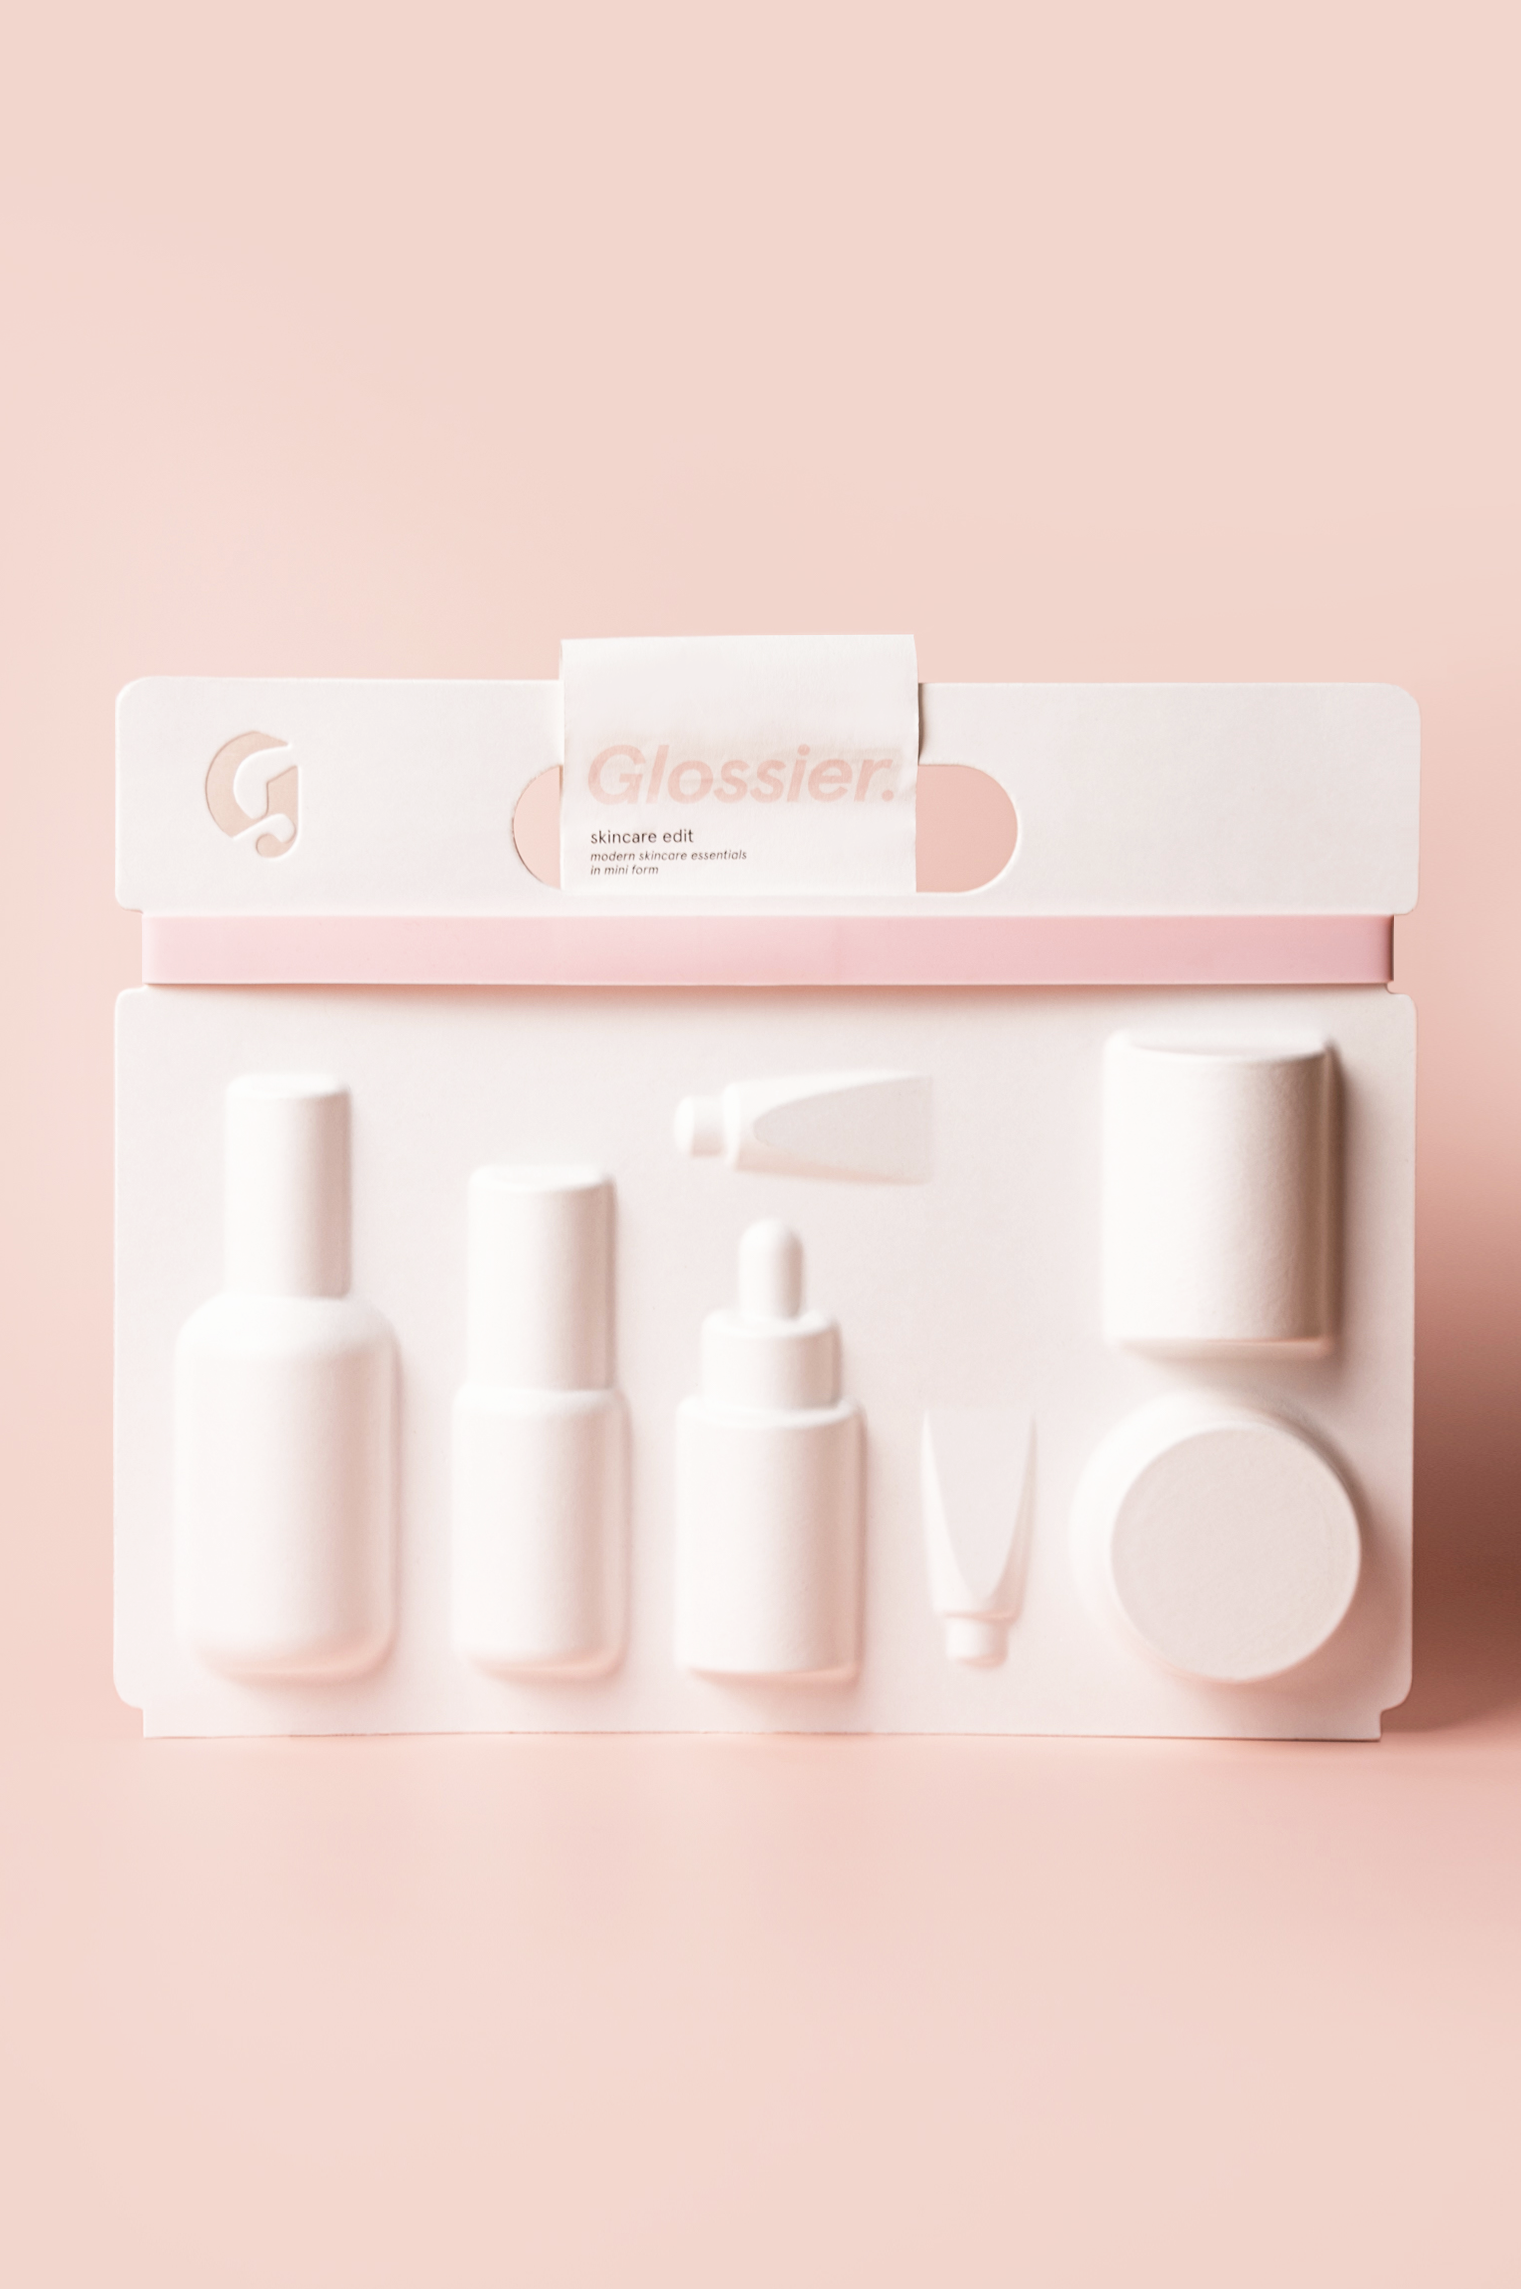 Glossier's best-selling skincare in travel-friendly sizes 